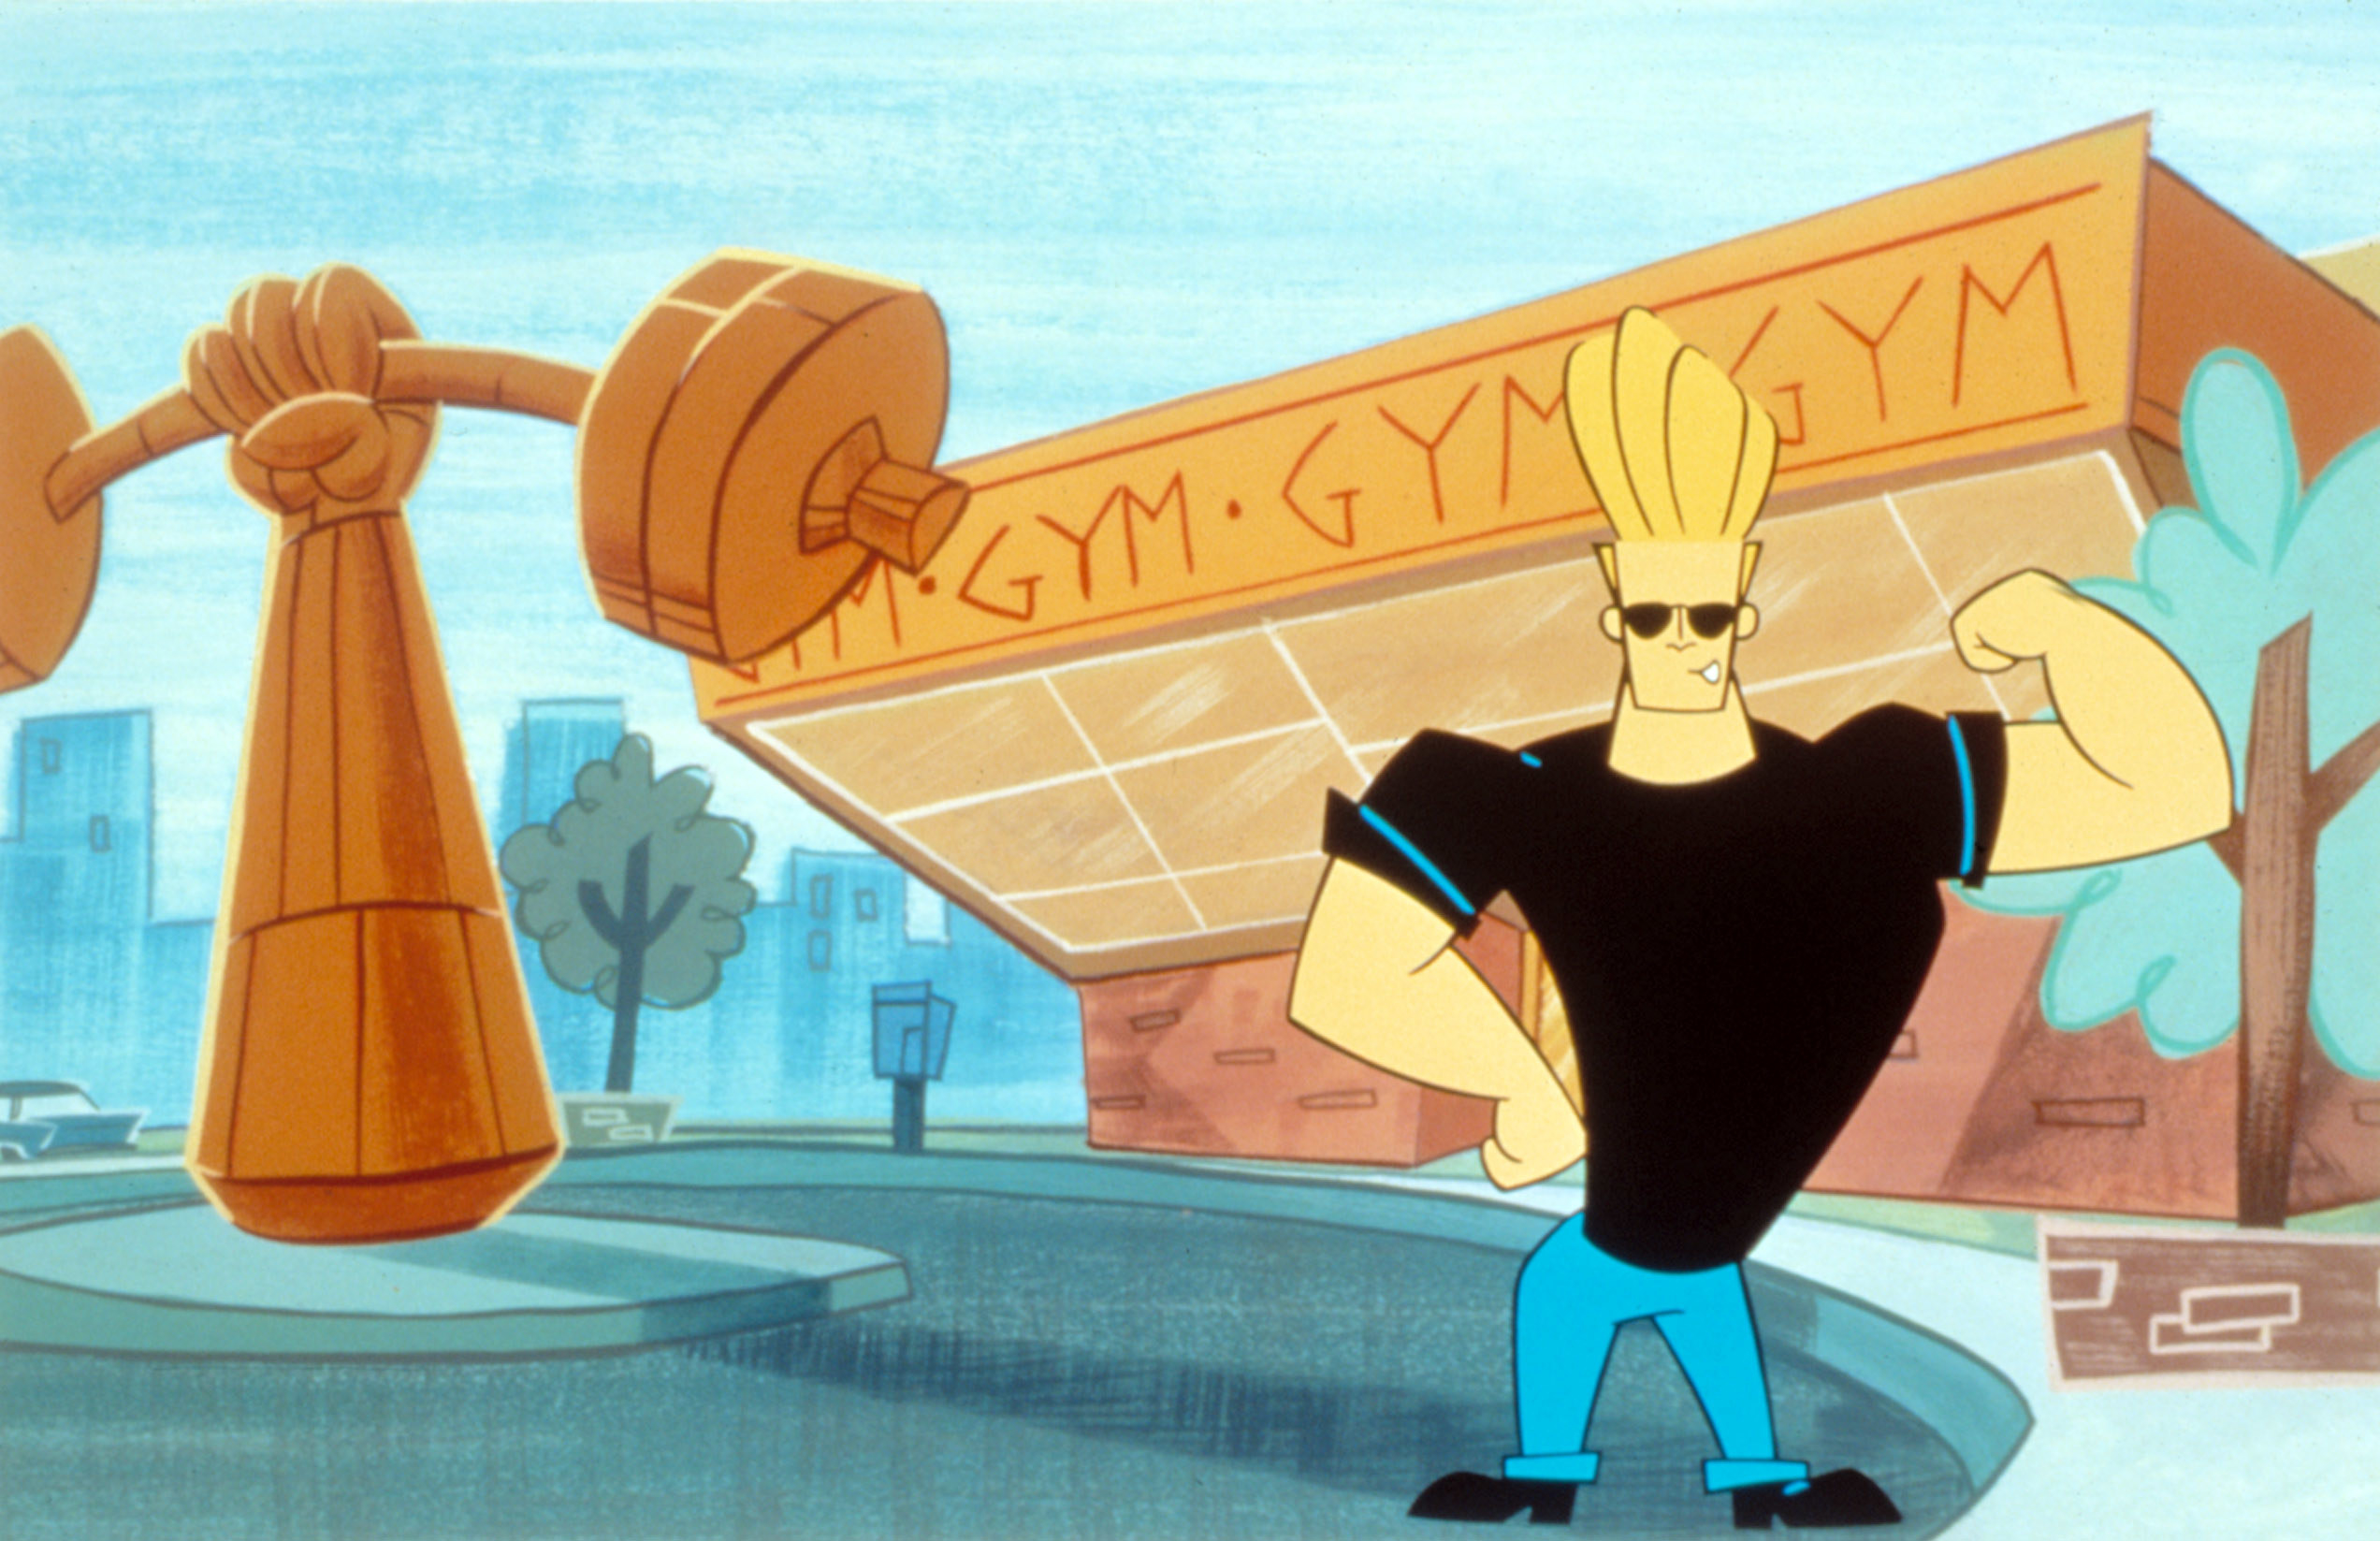 Johnny Bravo, an animated teen boy with large upper body, sunglasses, and tall blonde hair, flexes a bicep in front of a gym.